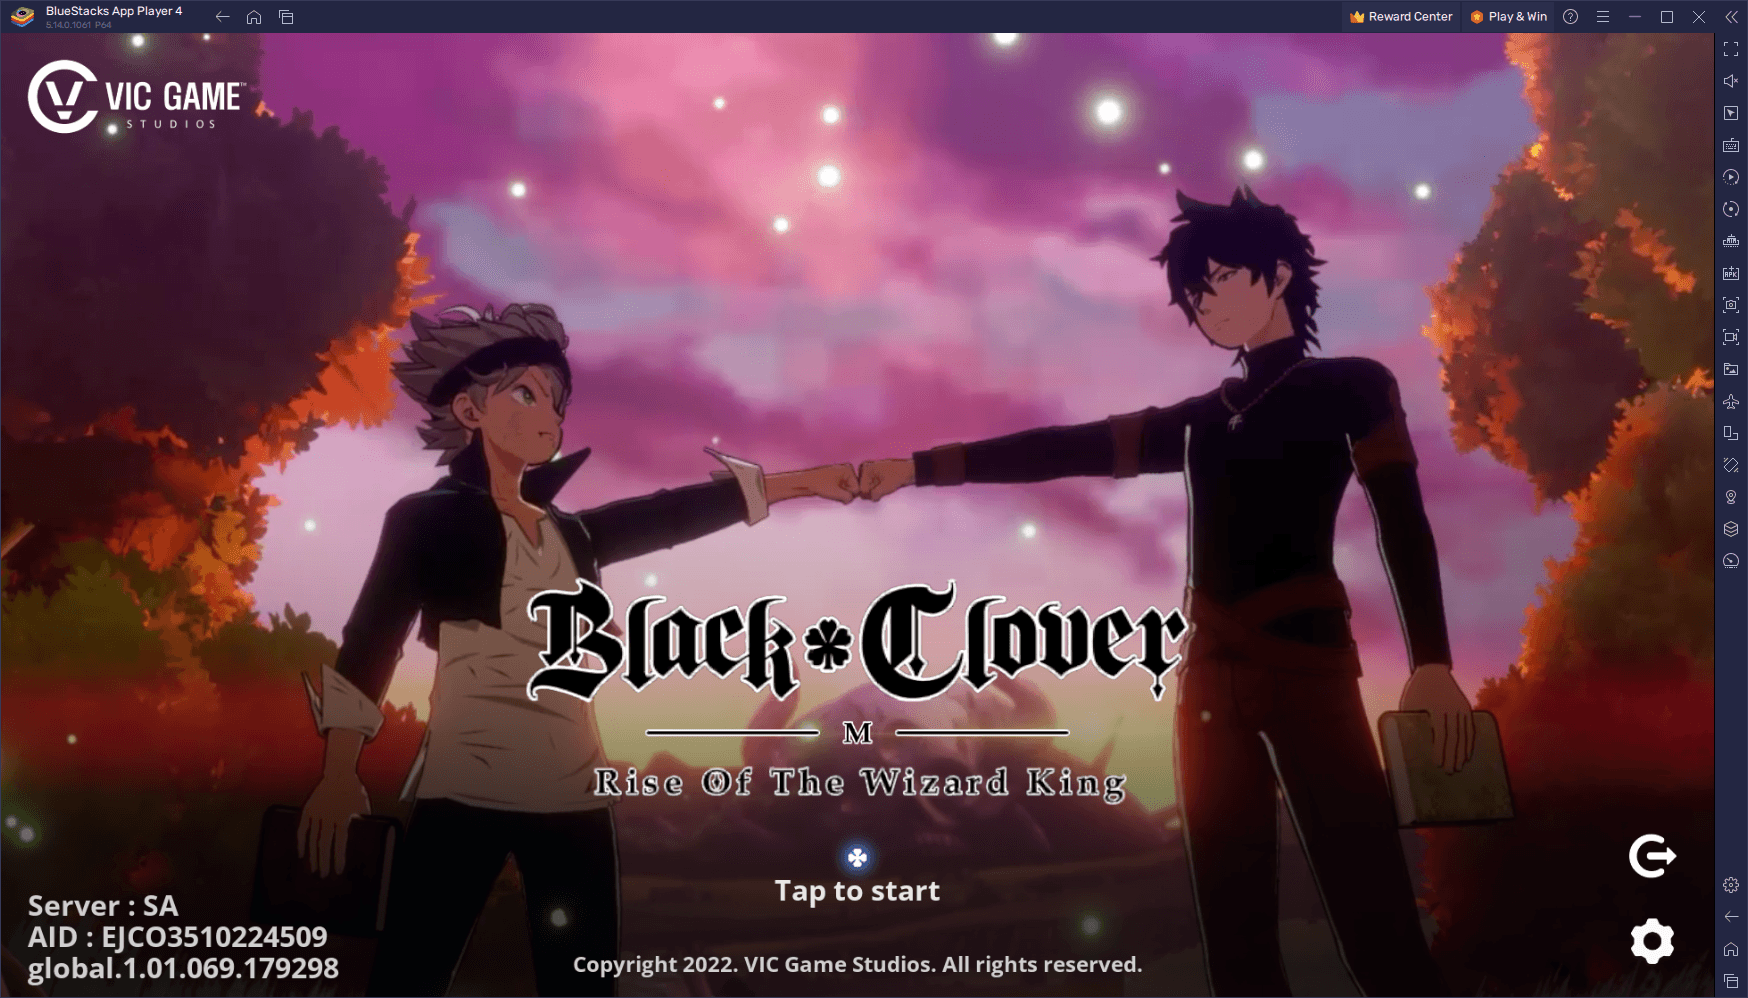 The Best Black Clover M 60 FPS Experience Available Exclusively on BlueStacks